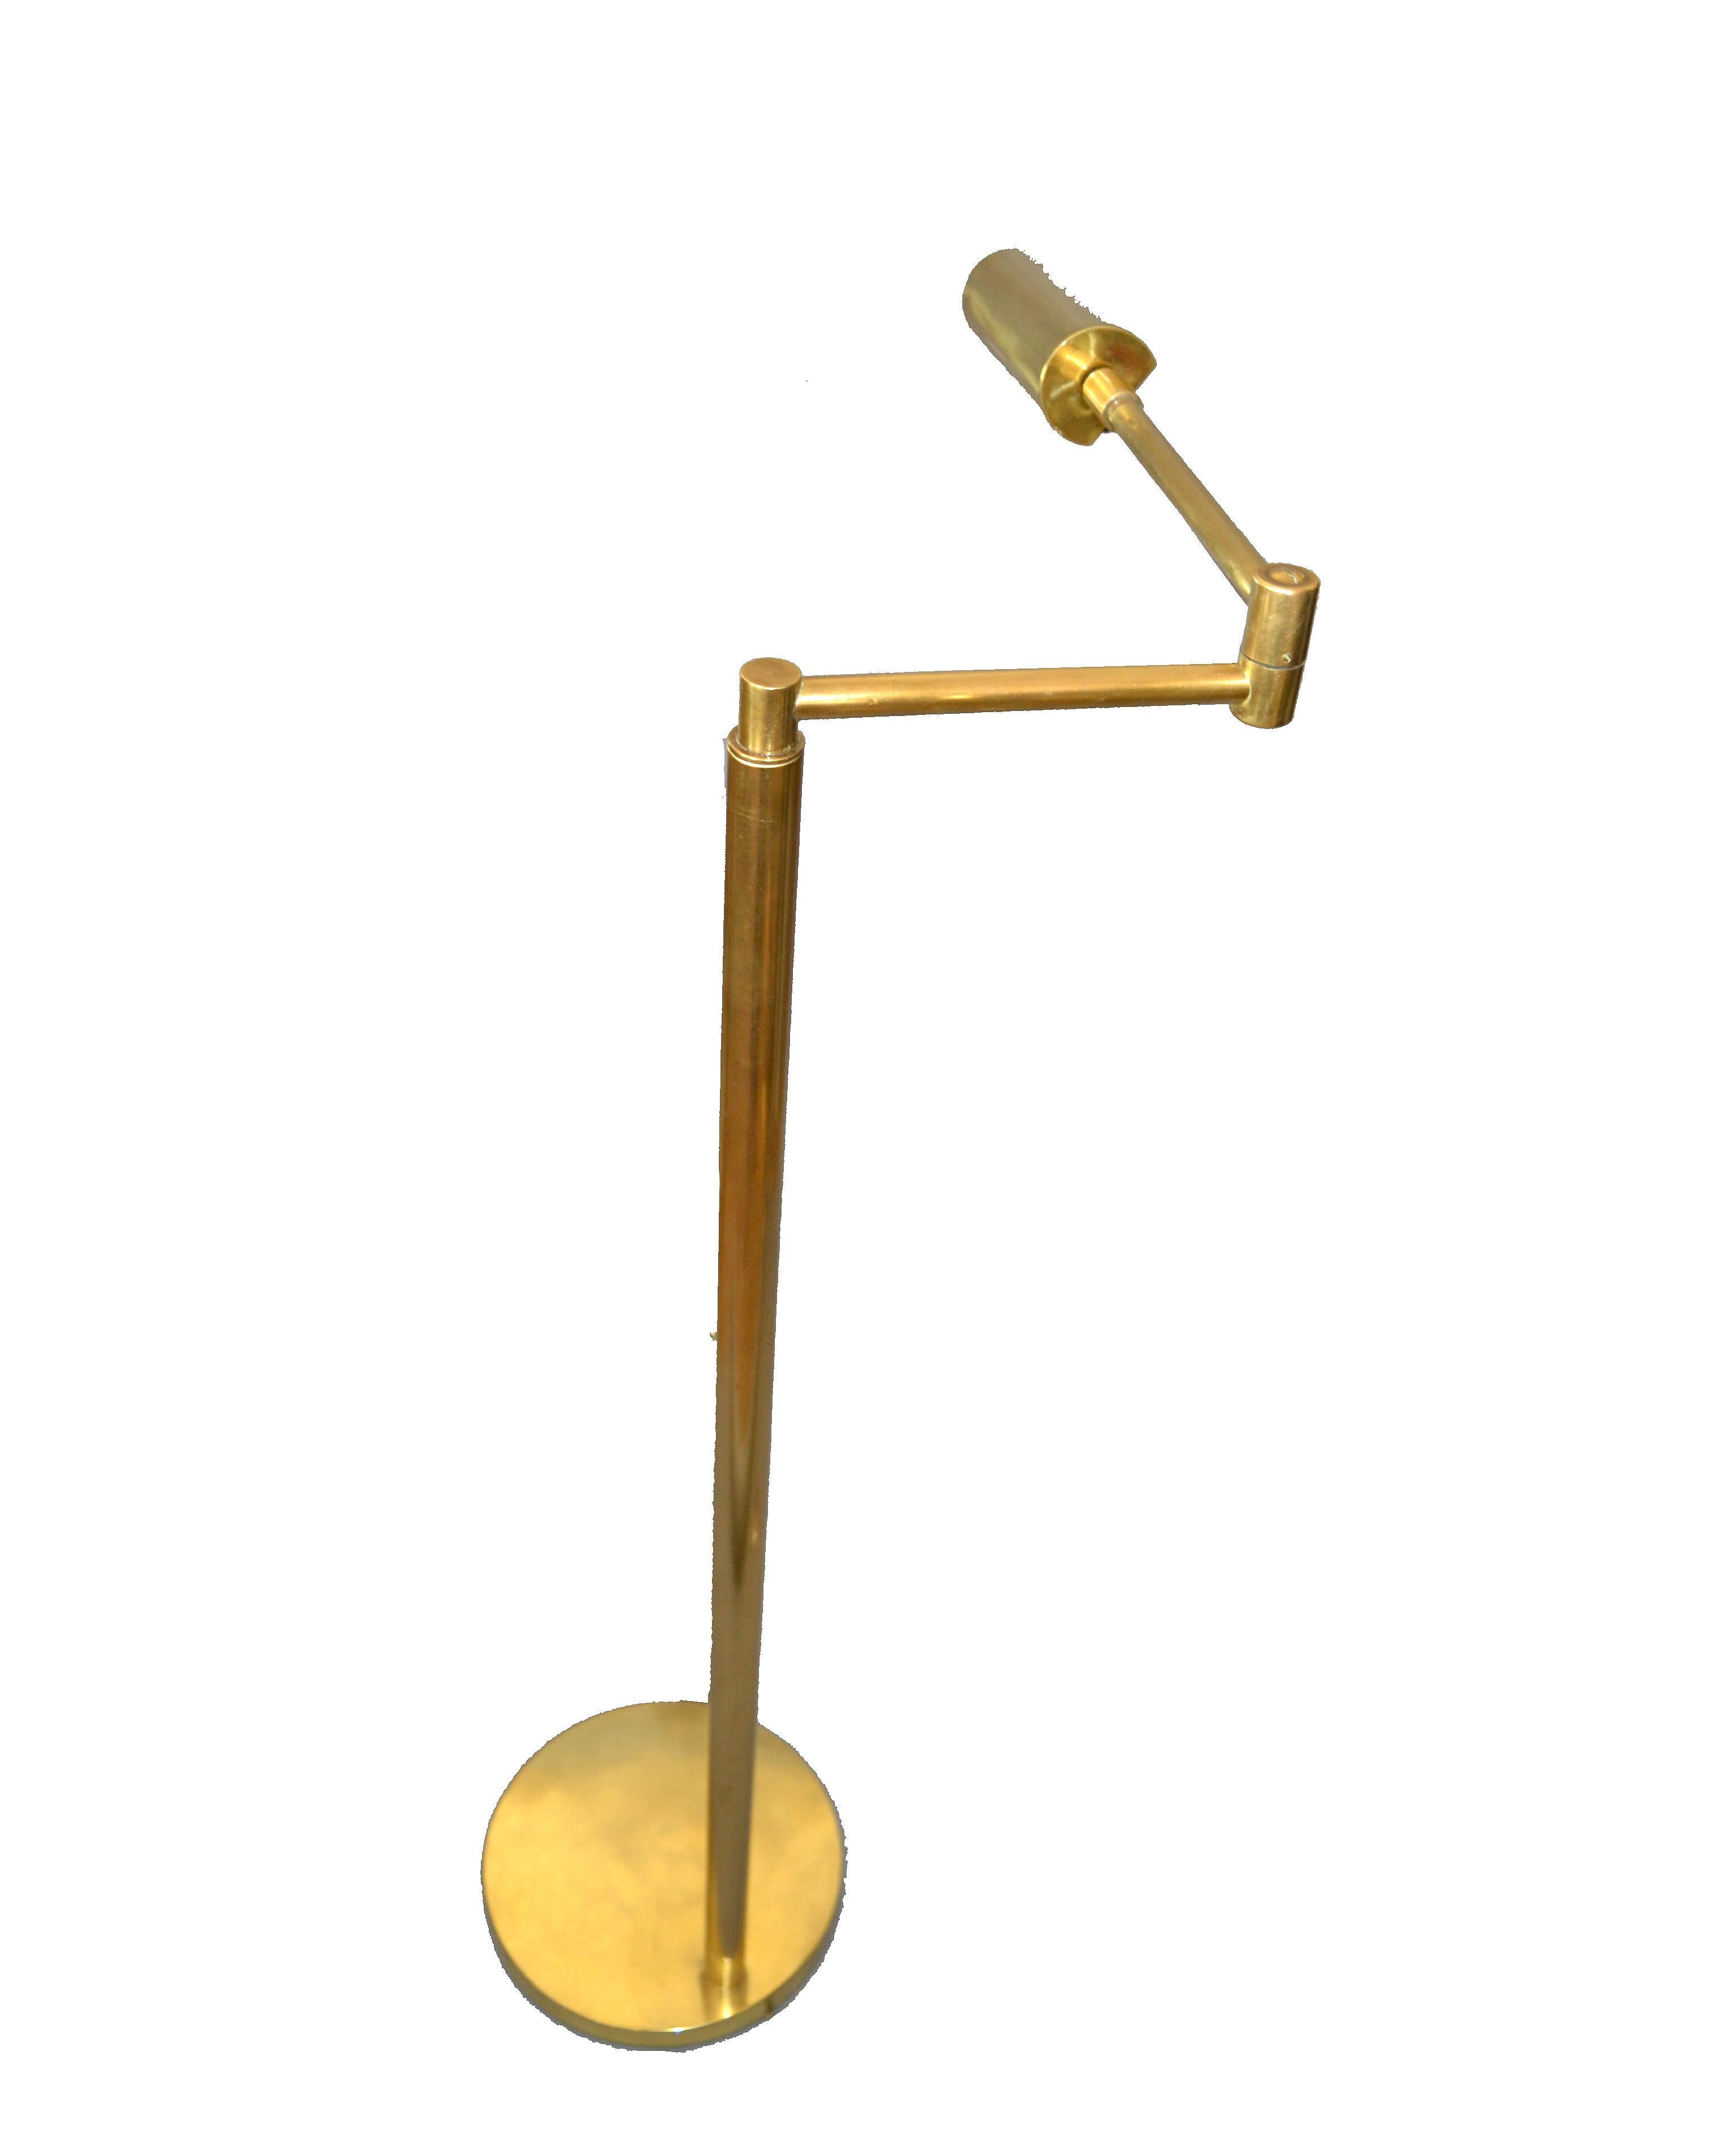 Mid-Century Modern Italian brass swing arm floor or reading lamp.
Comes with a footswitch and the shade rotates.
Wired for the U.S. and uses a max. 40 watts light bulb as shown in the pictures.
 